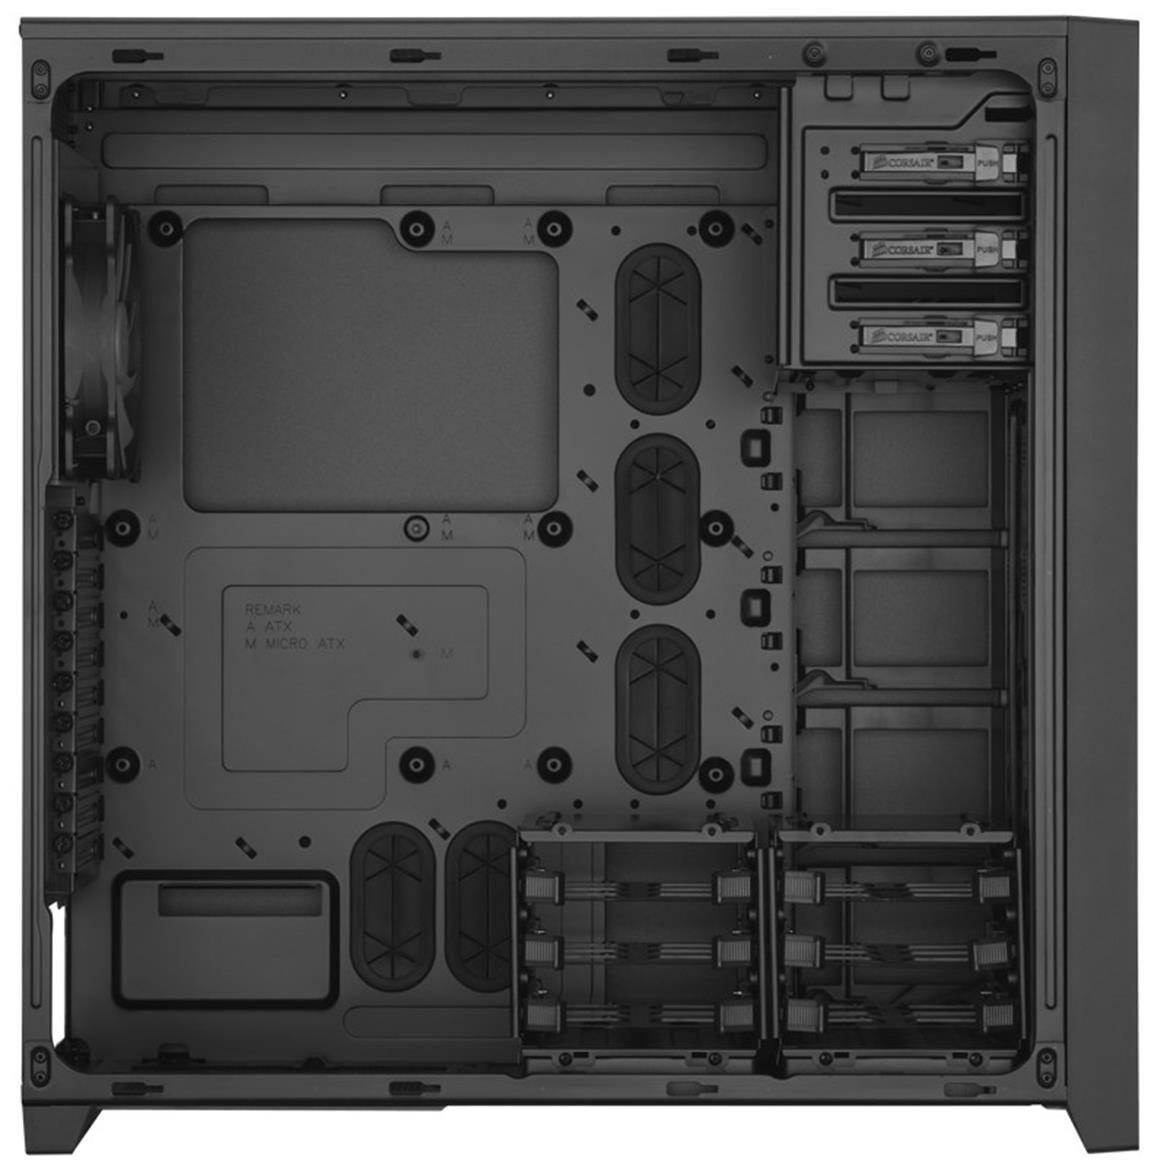 Corsair Obsidian 750D Case: Well Built For Water Cooling